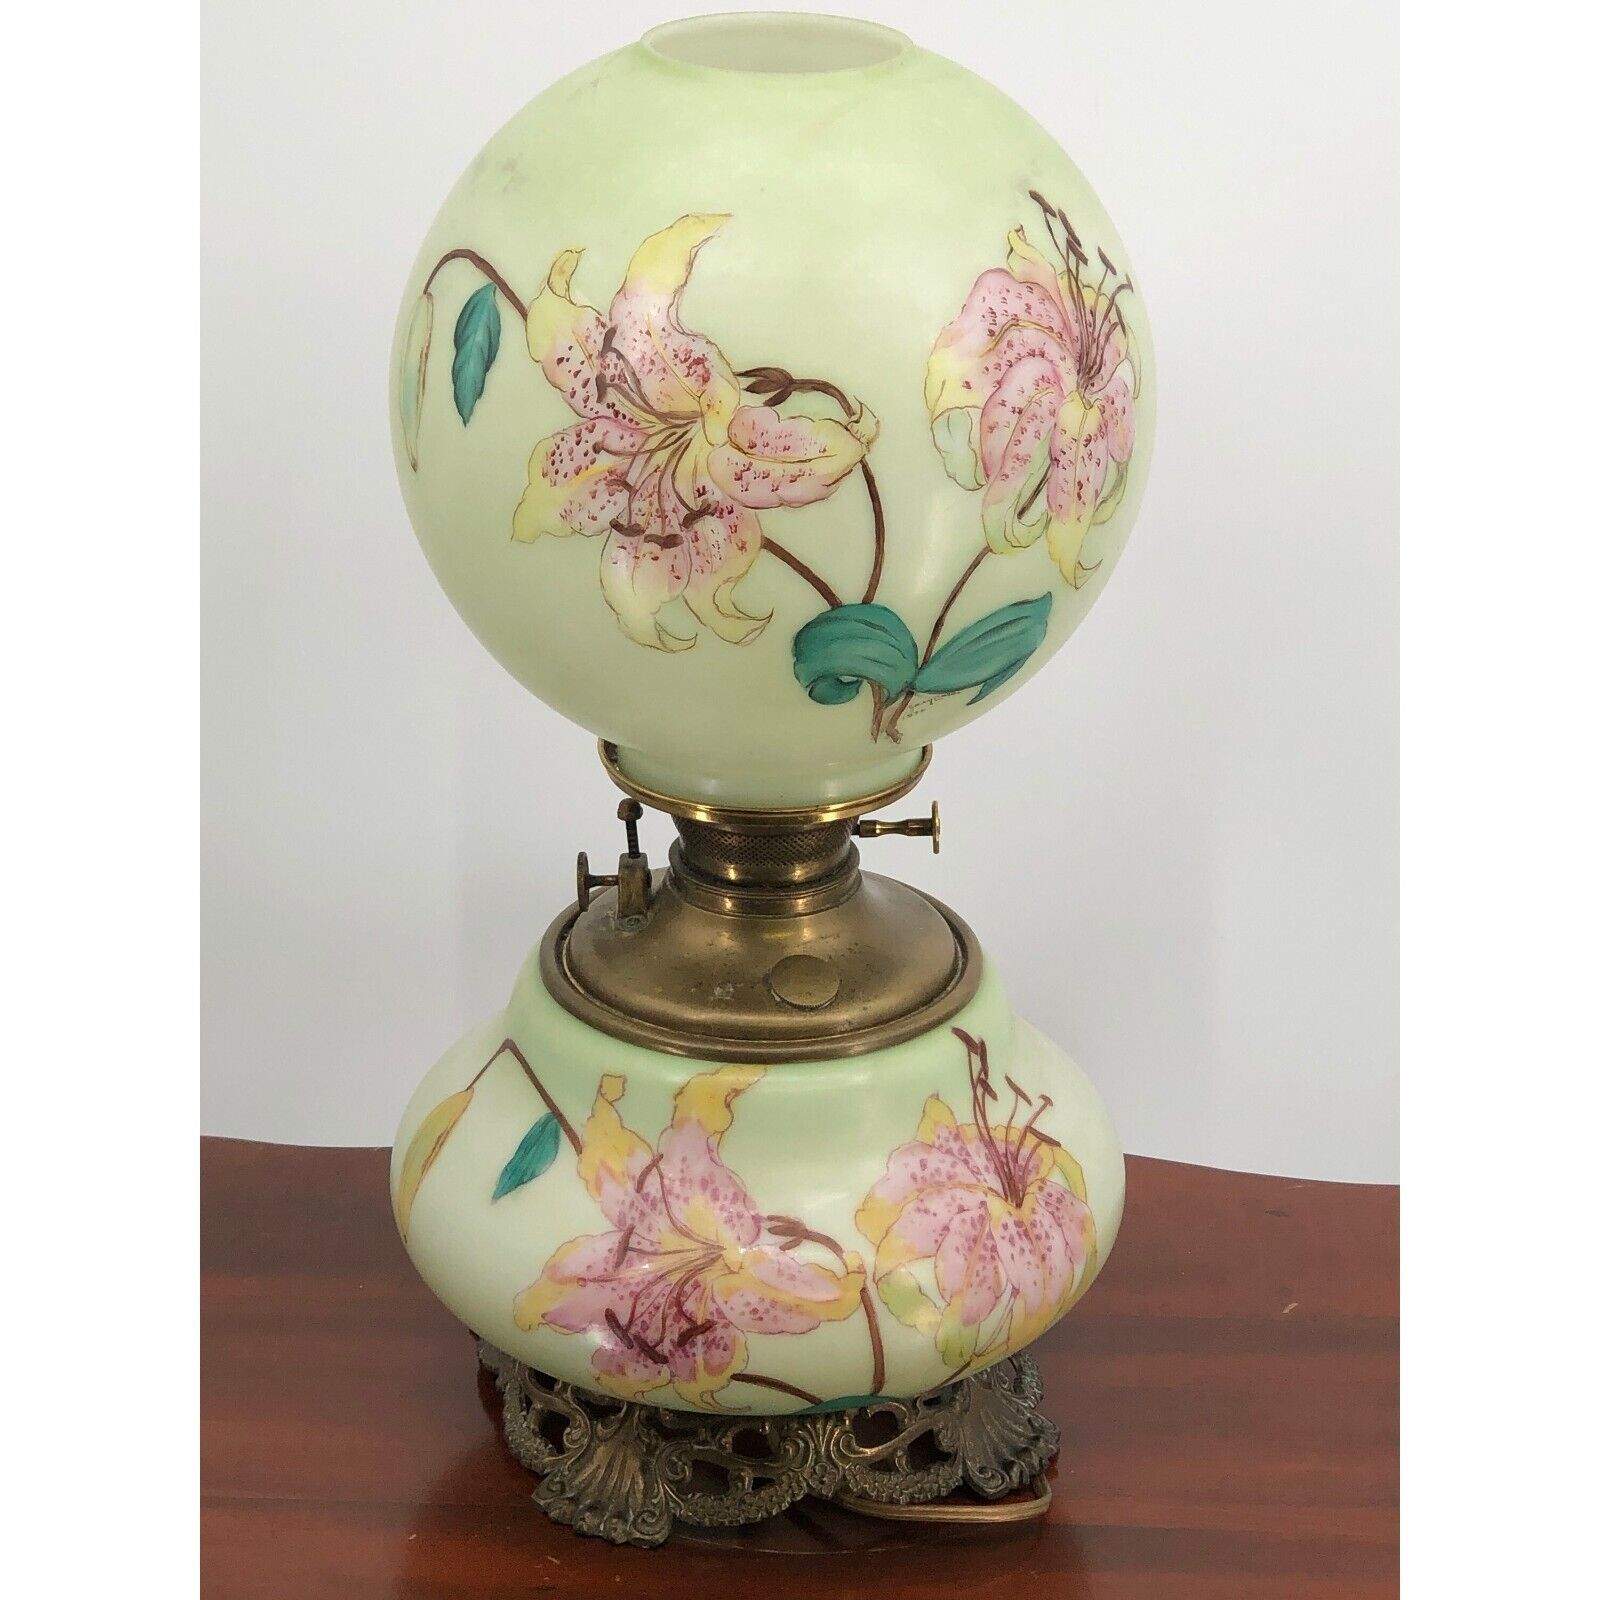 Antique Victorian Hand Painted Tiger Lilly Gone With The Wind Lamp